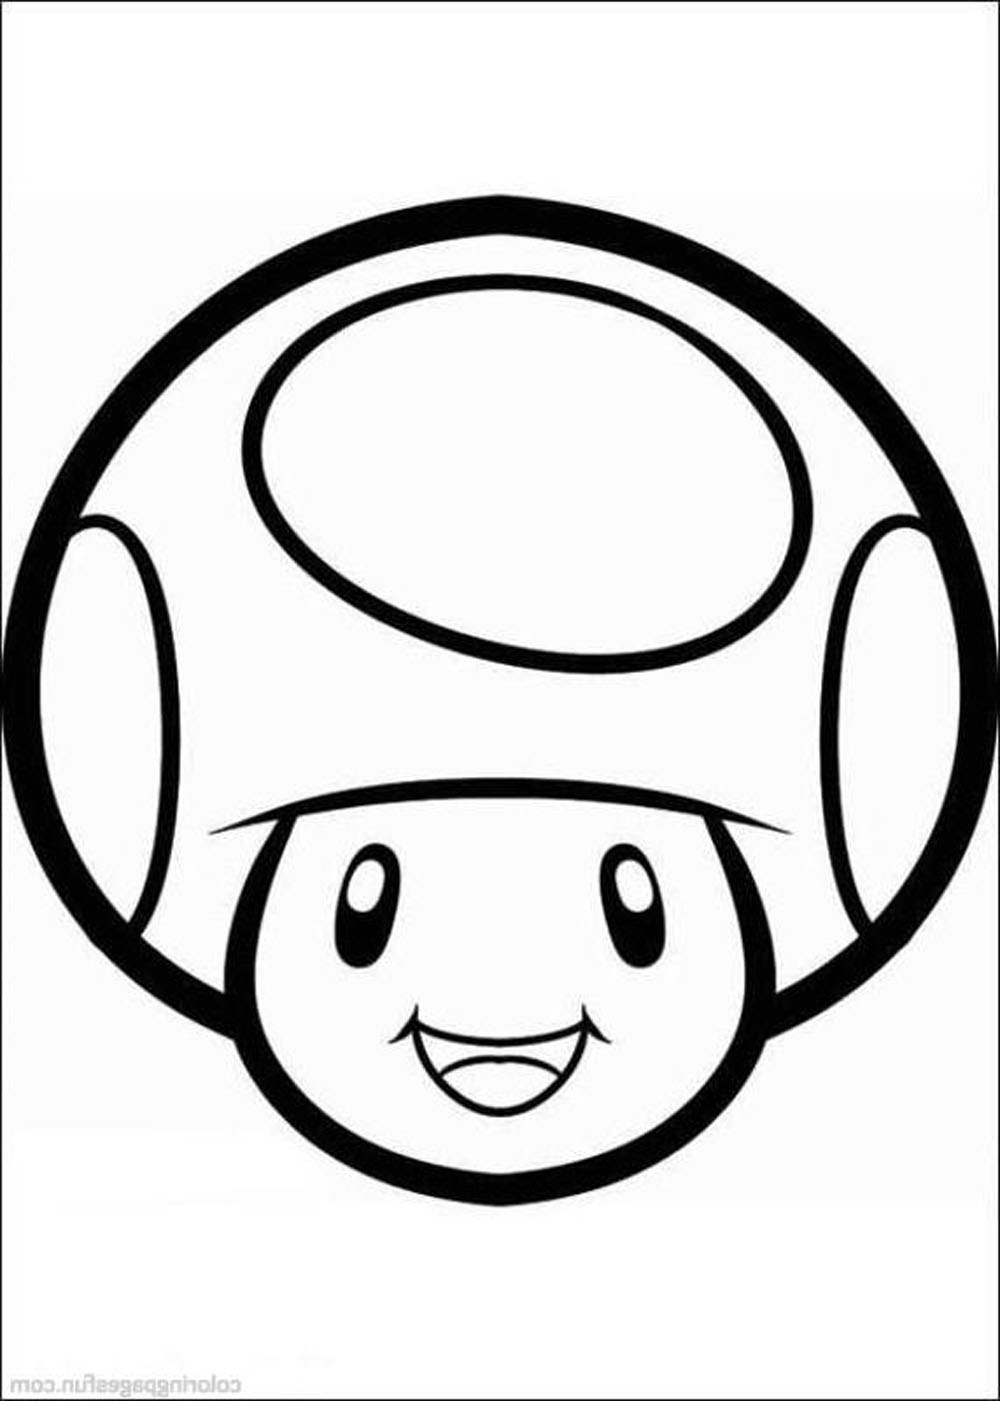 Download Mario Coloring Pages Themes - Best Apps For Kids